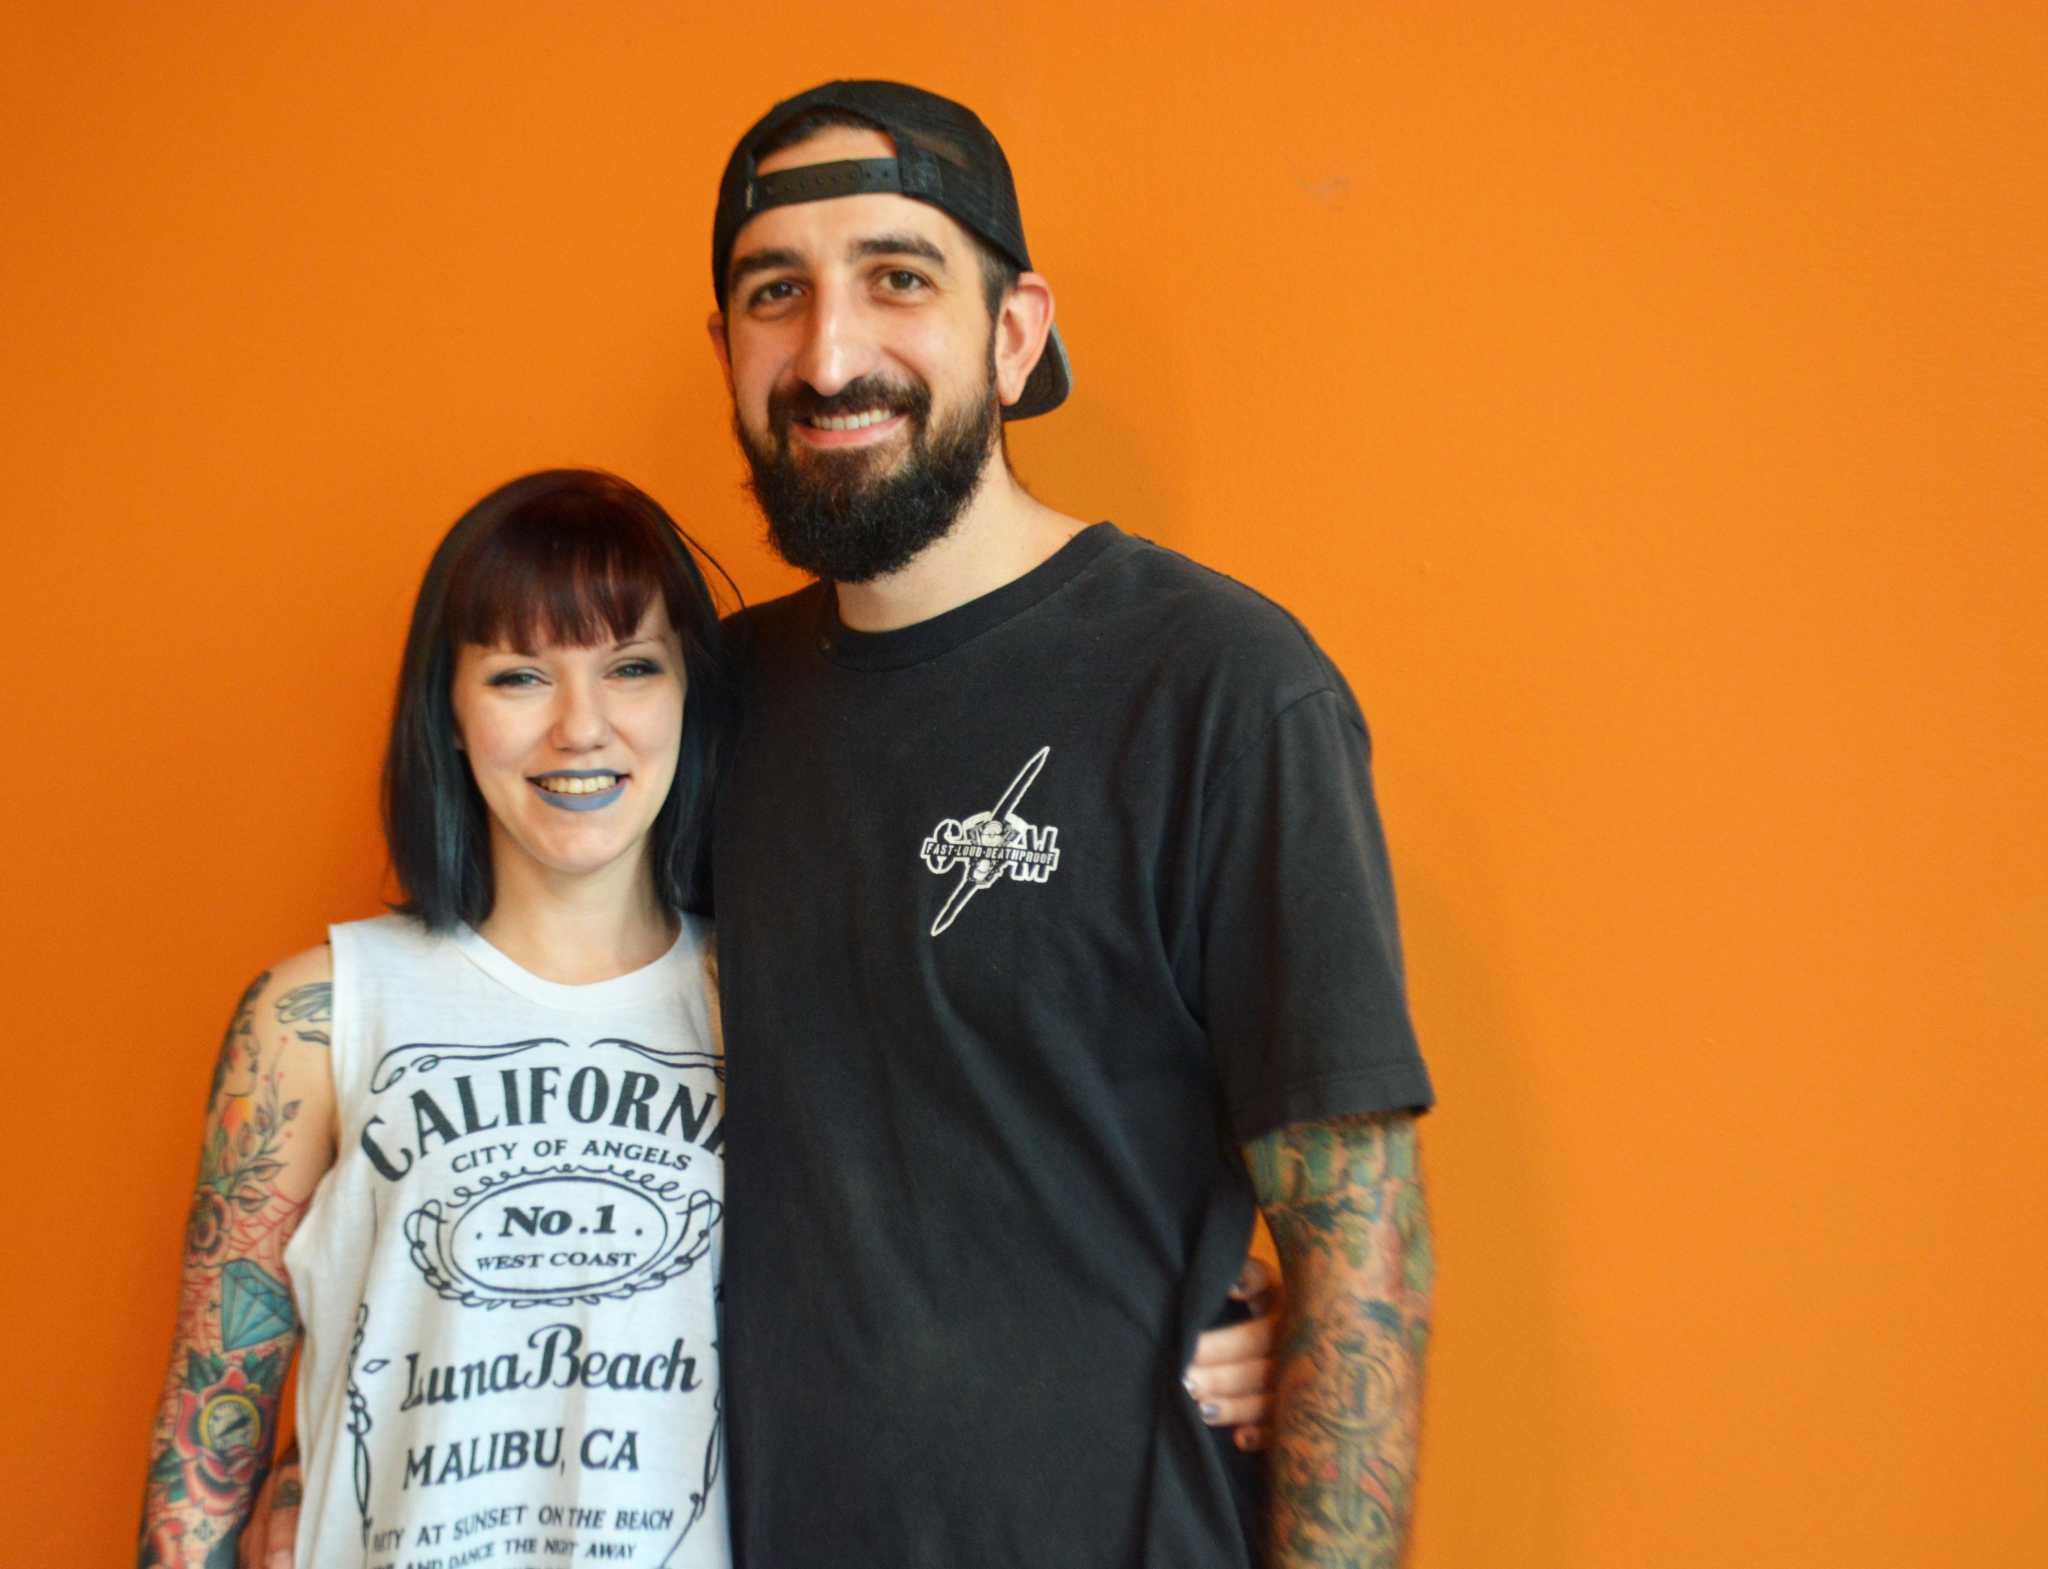 Coffee connoisseur couple wants customers to experience Perkatory